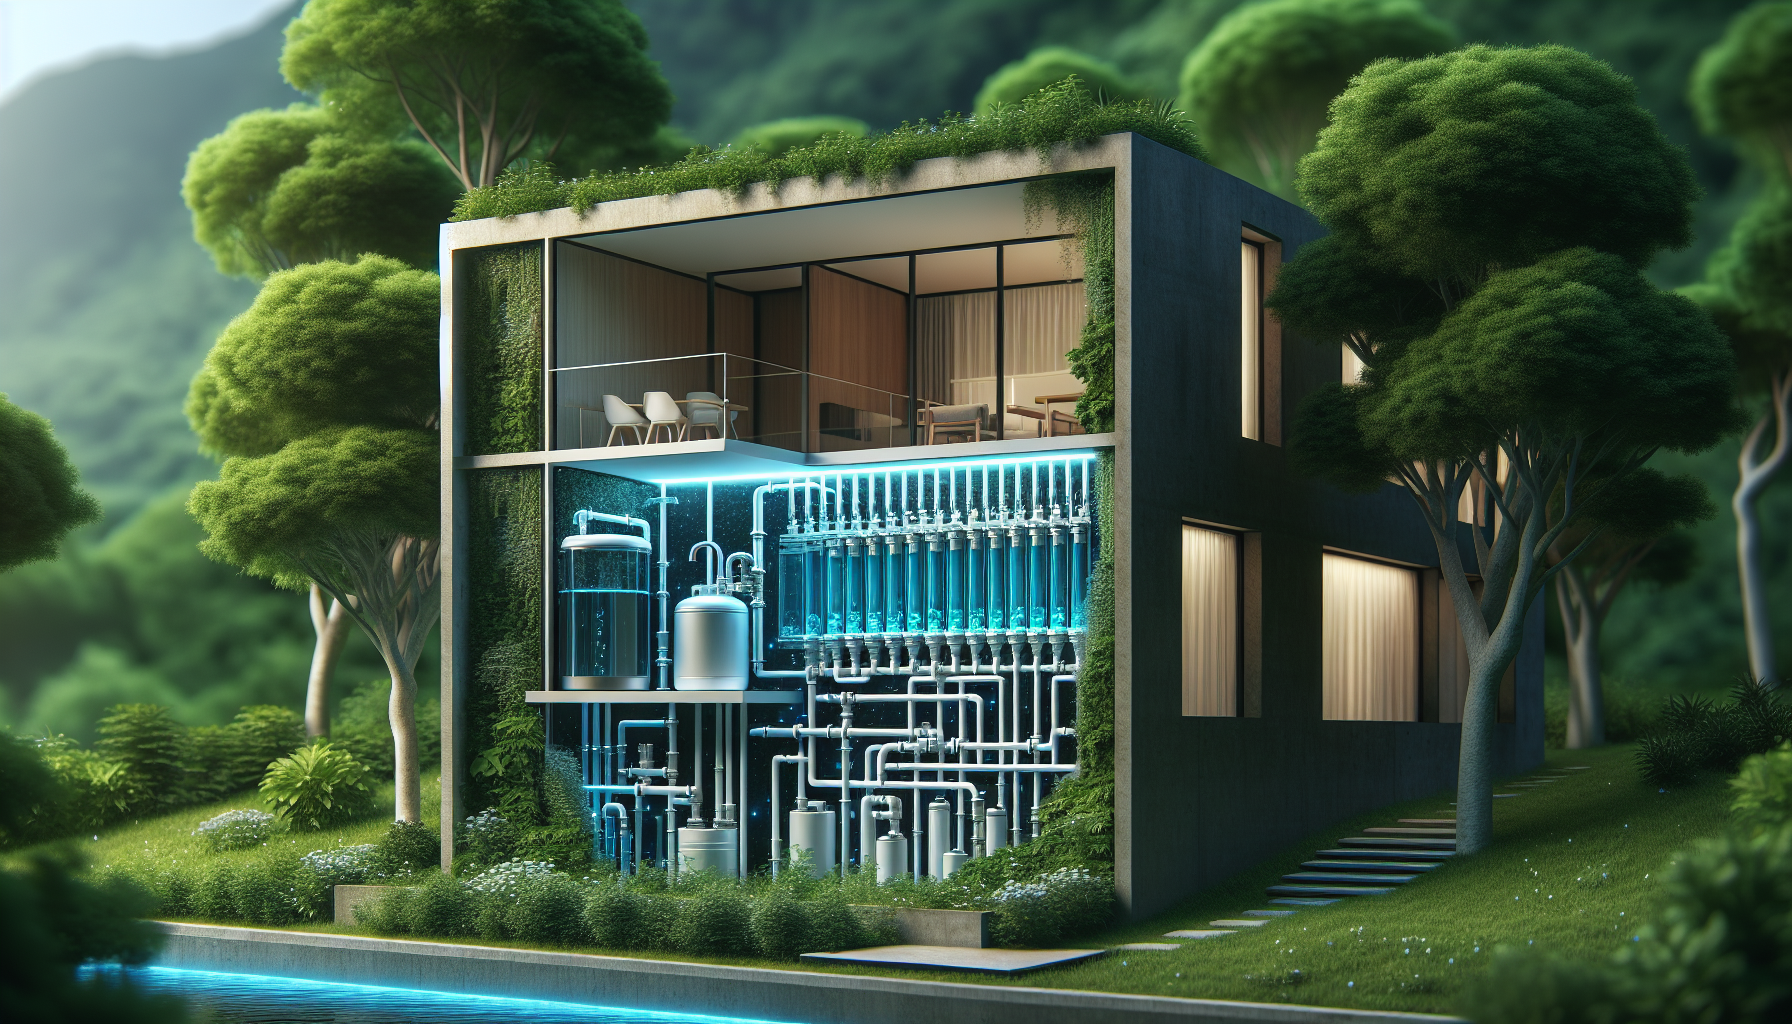 Illustration of a modern house with a water filtration system to depict the in-depth analysis of Puretec Water Filtration Systems